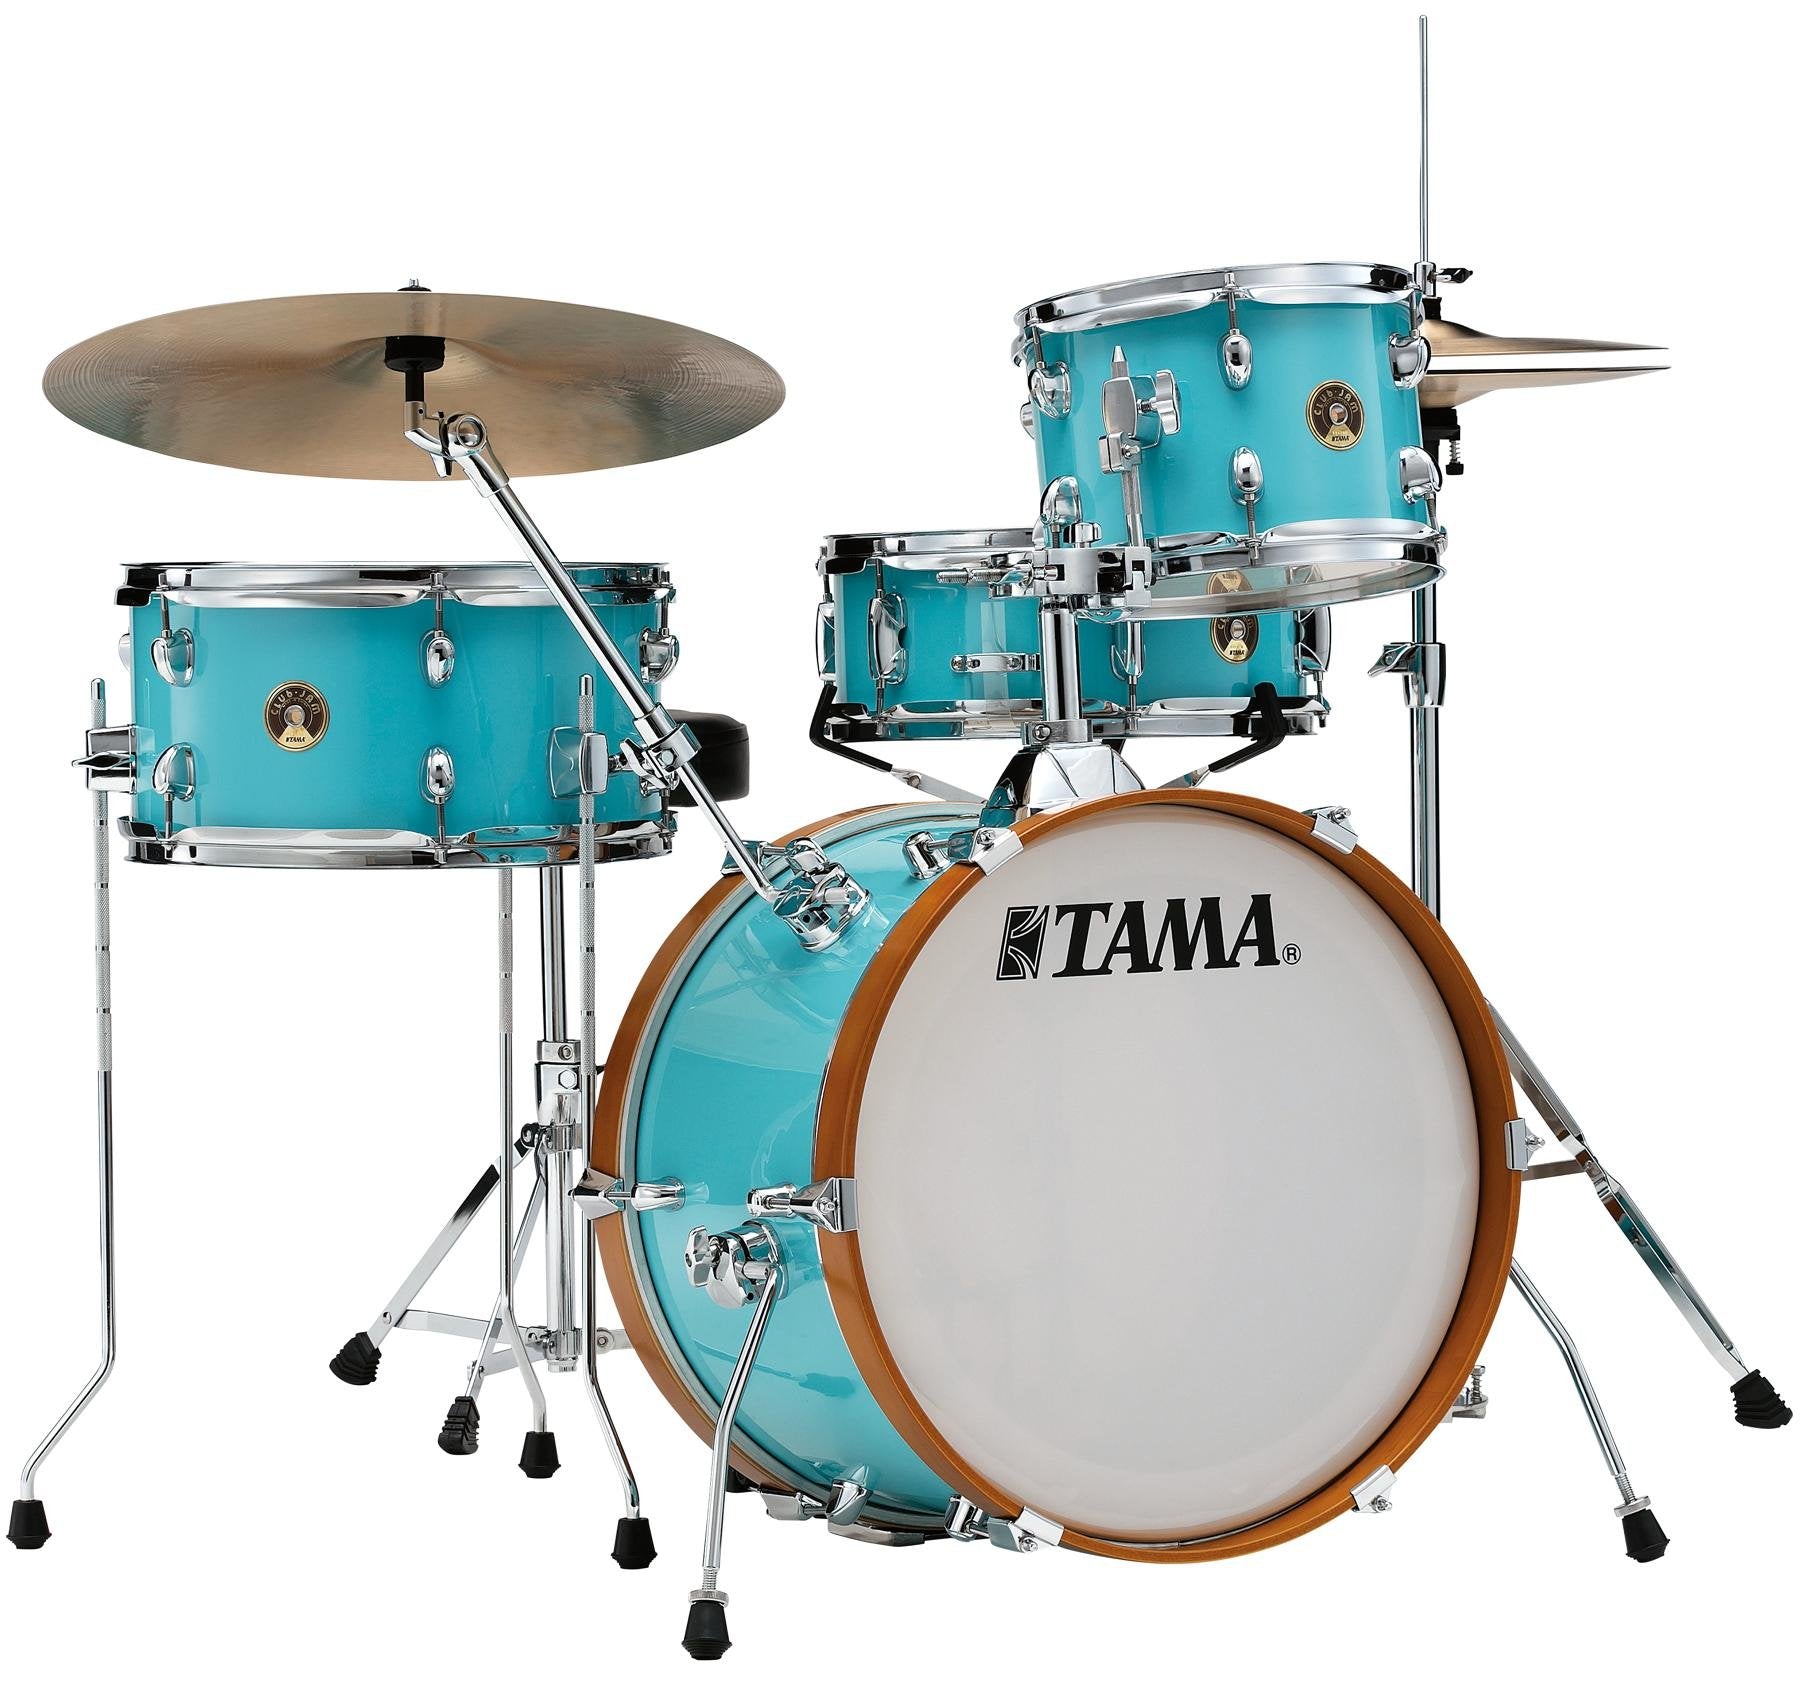 TAMA Club Jam 4-pc Drum Set w/ Hardware (Available in 3 Colors)